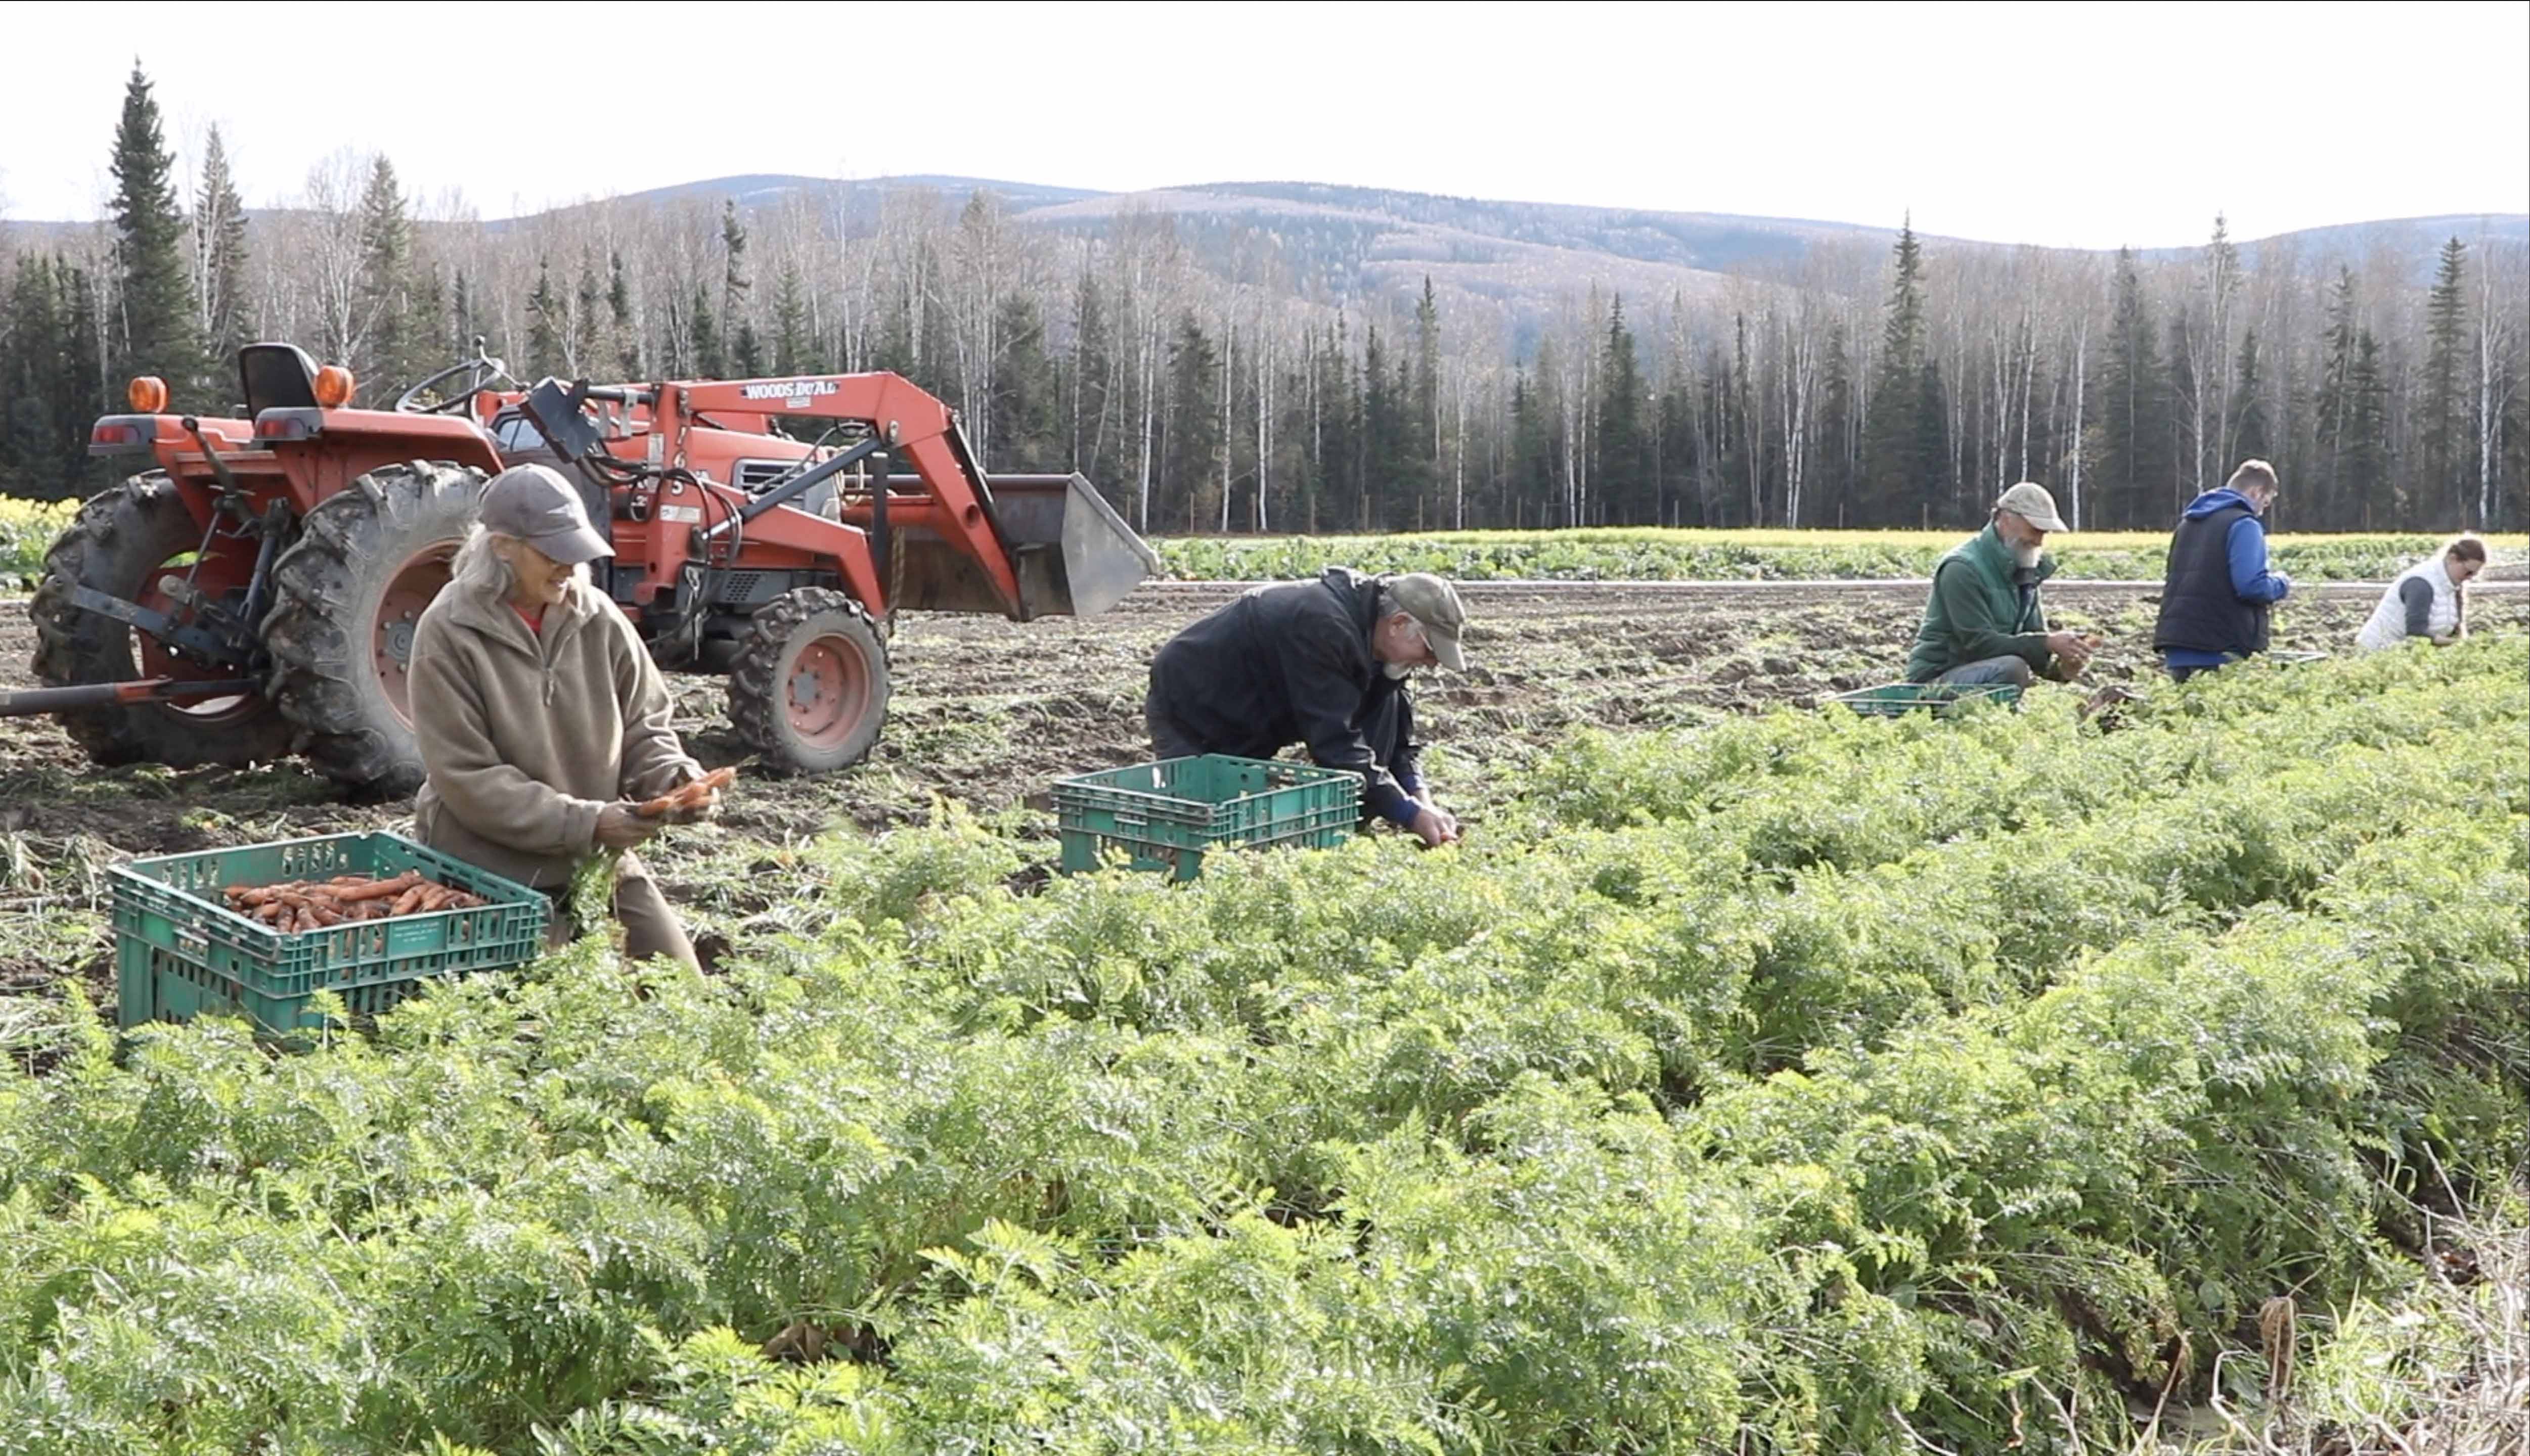 How Can Alaska Become More Food Secure?